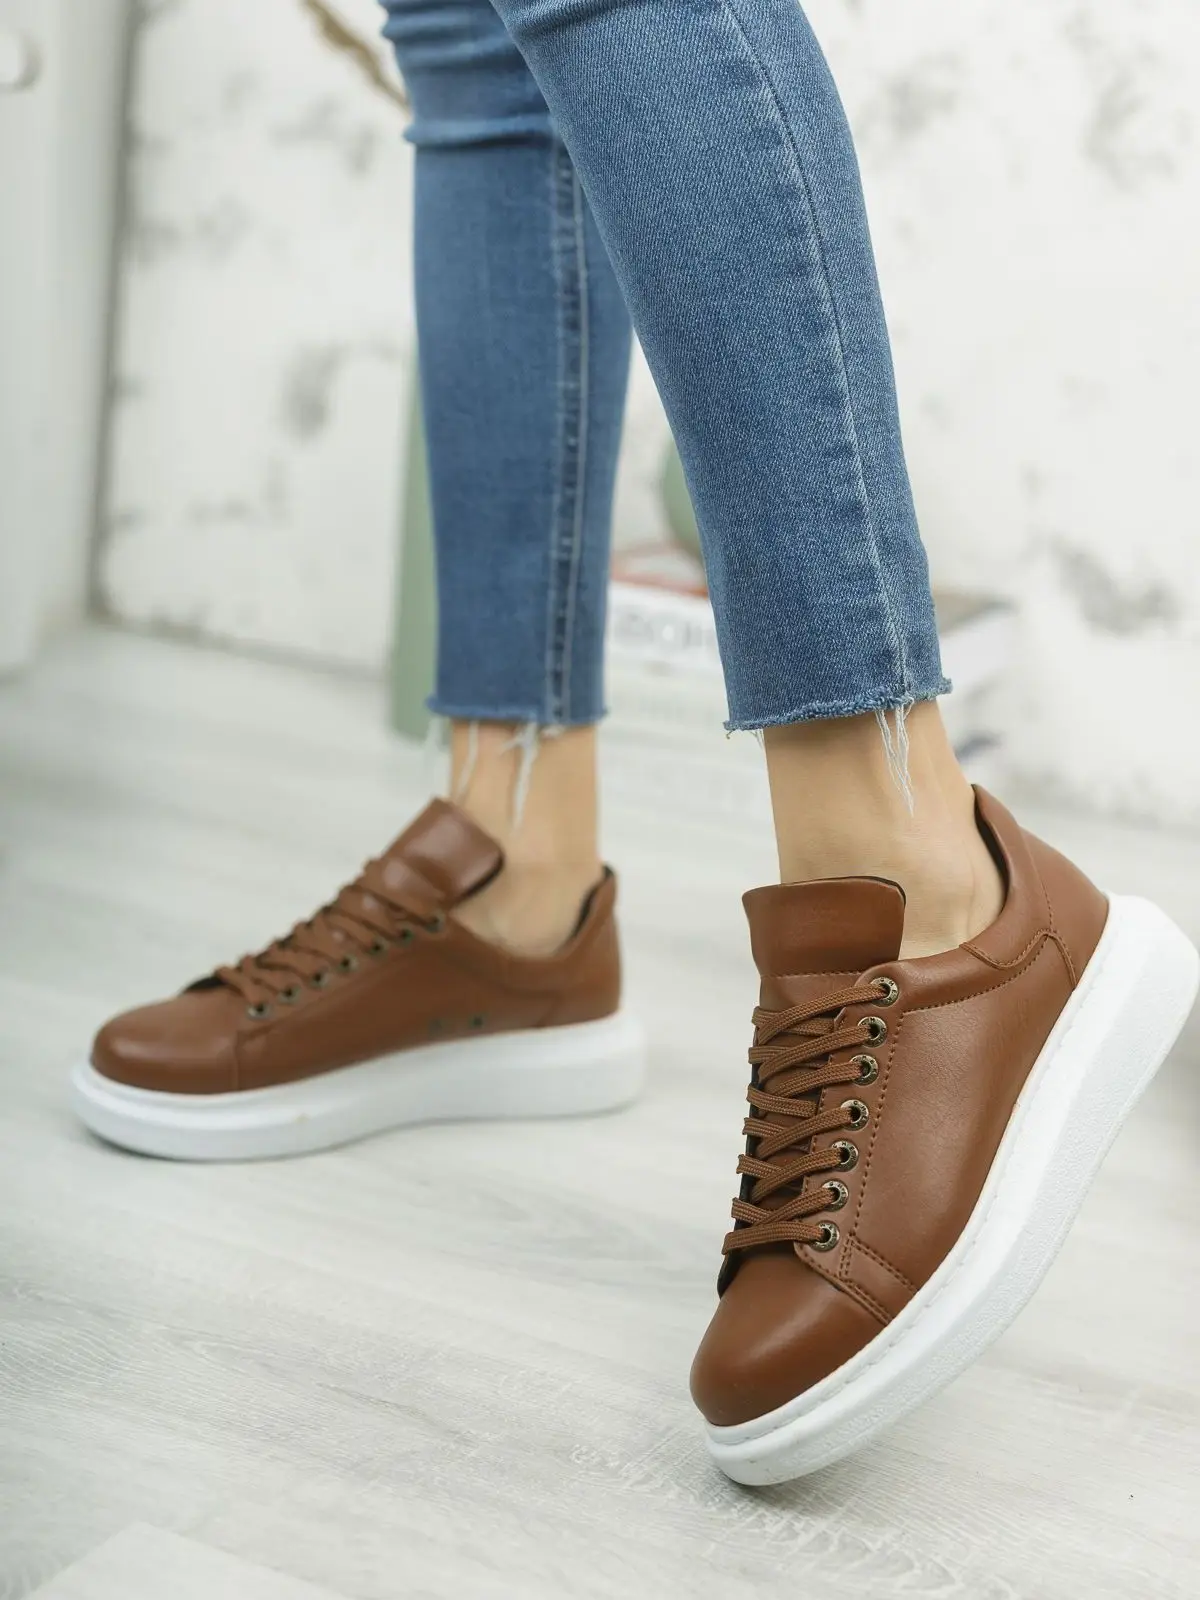 Chekich Brown Color White Sole Lace-up Artificial Leather Women Shoes Orthopedic Odorless Eco-Friendly 4 Seasons Vegan CH257